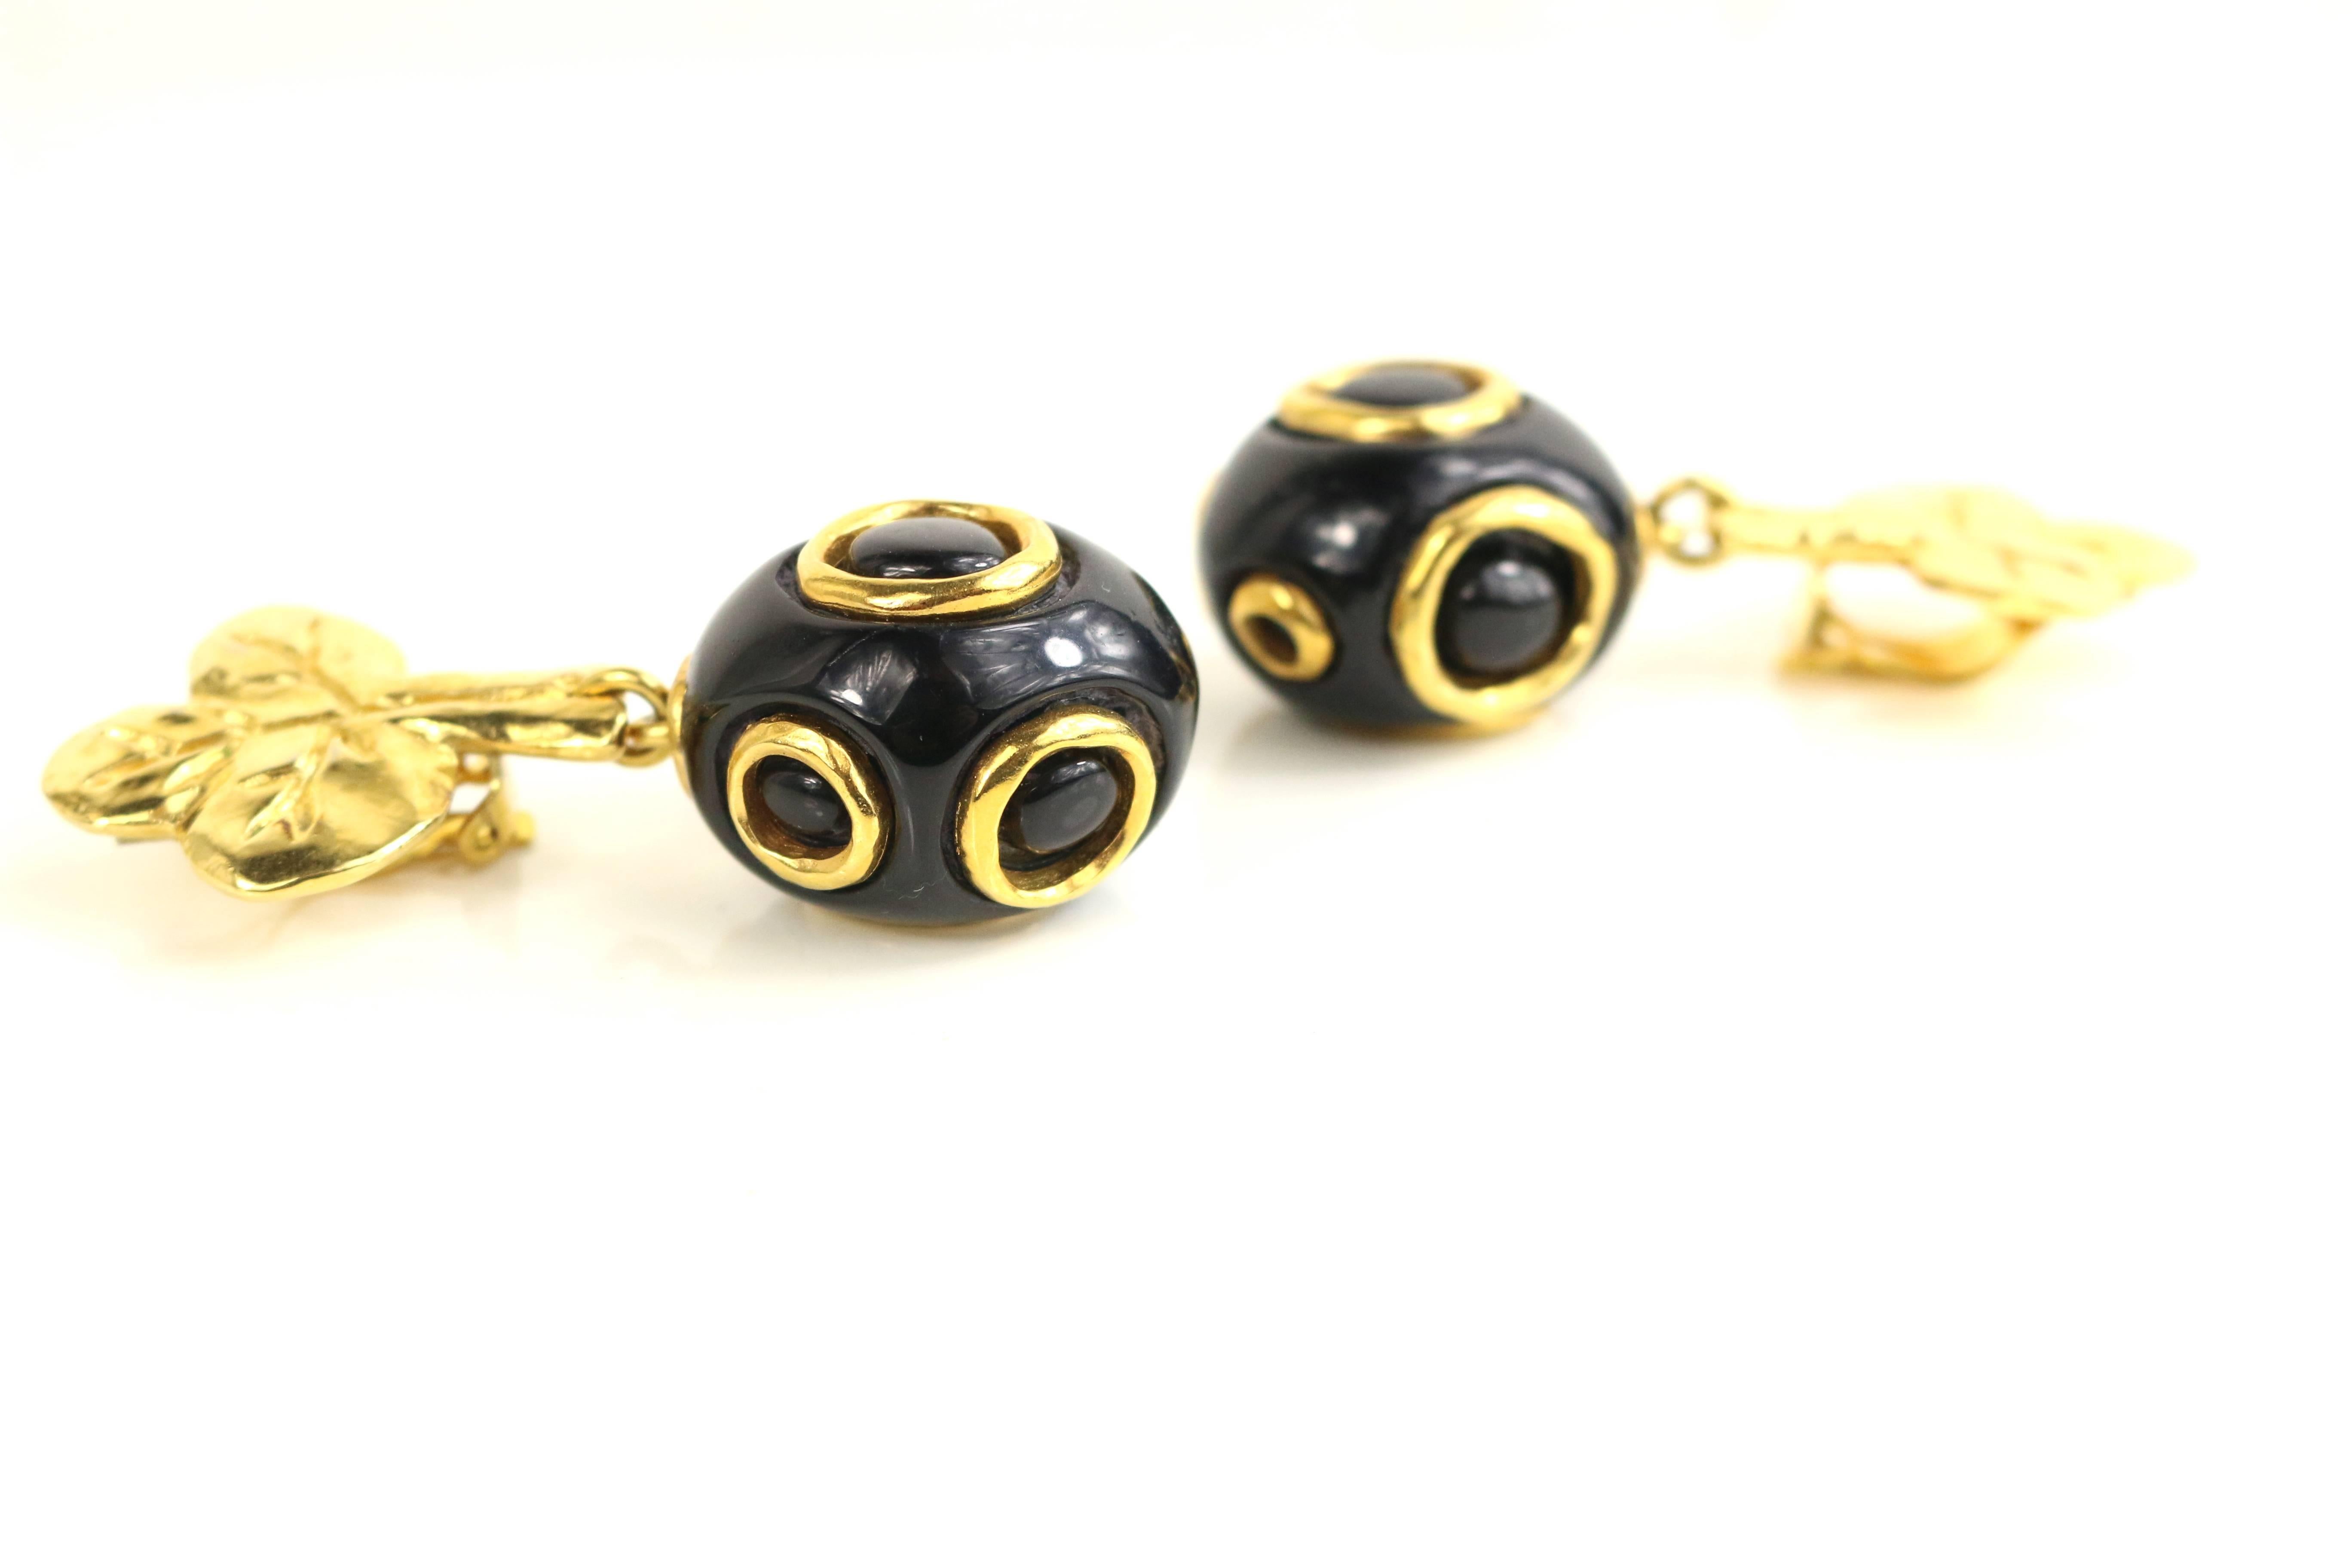 - Vintage 90s Christian Lacroix black and gold-toned hardware clover clip-on earrings. 

- Featuring drop black and gold-toned hardware round shape. 

- Height: 2.5 inches. (6.4cm). Length: 1 inches (2.5 cm). Diameter: 1 inches (2.5 cm). 

